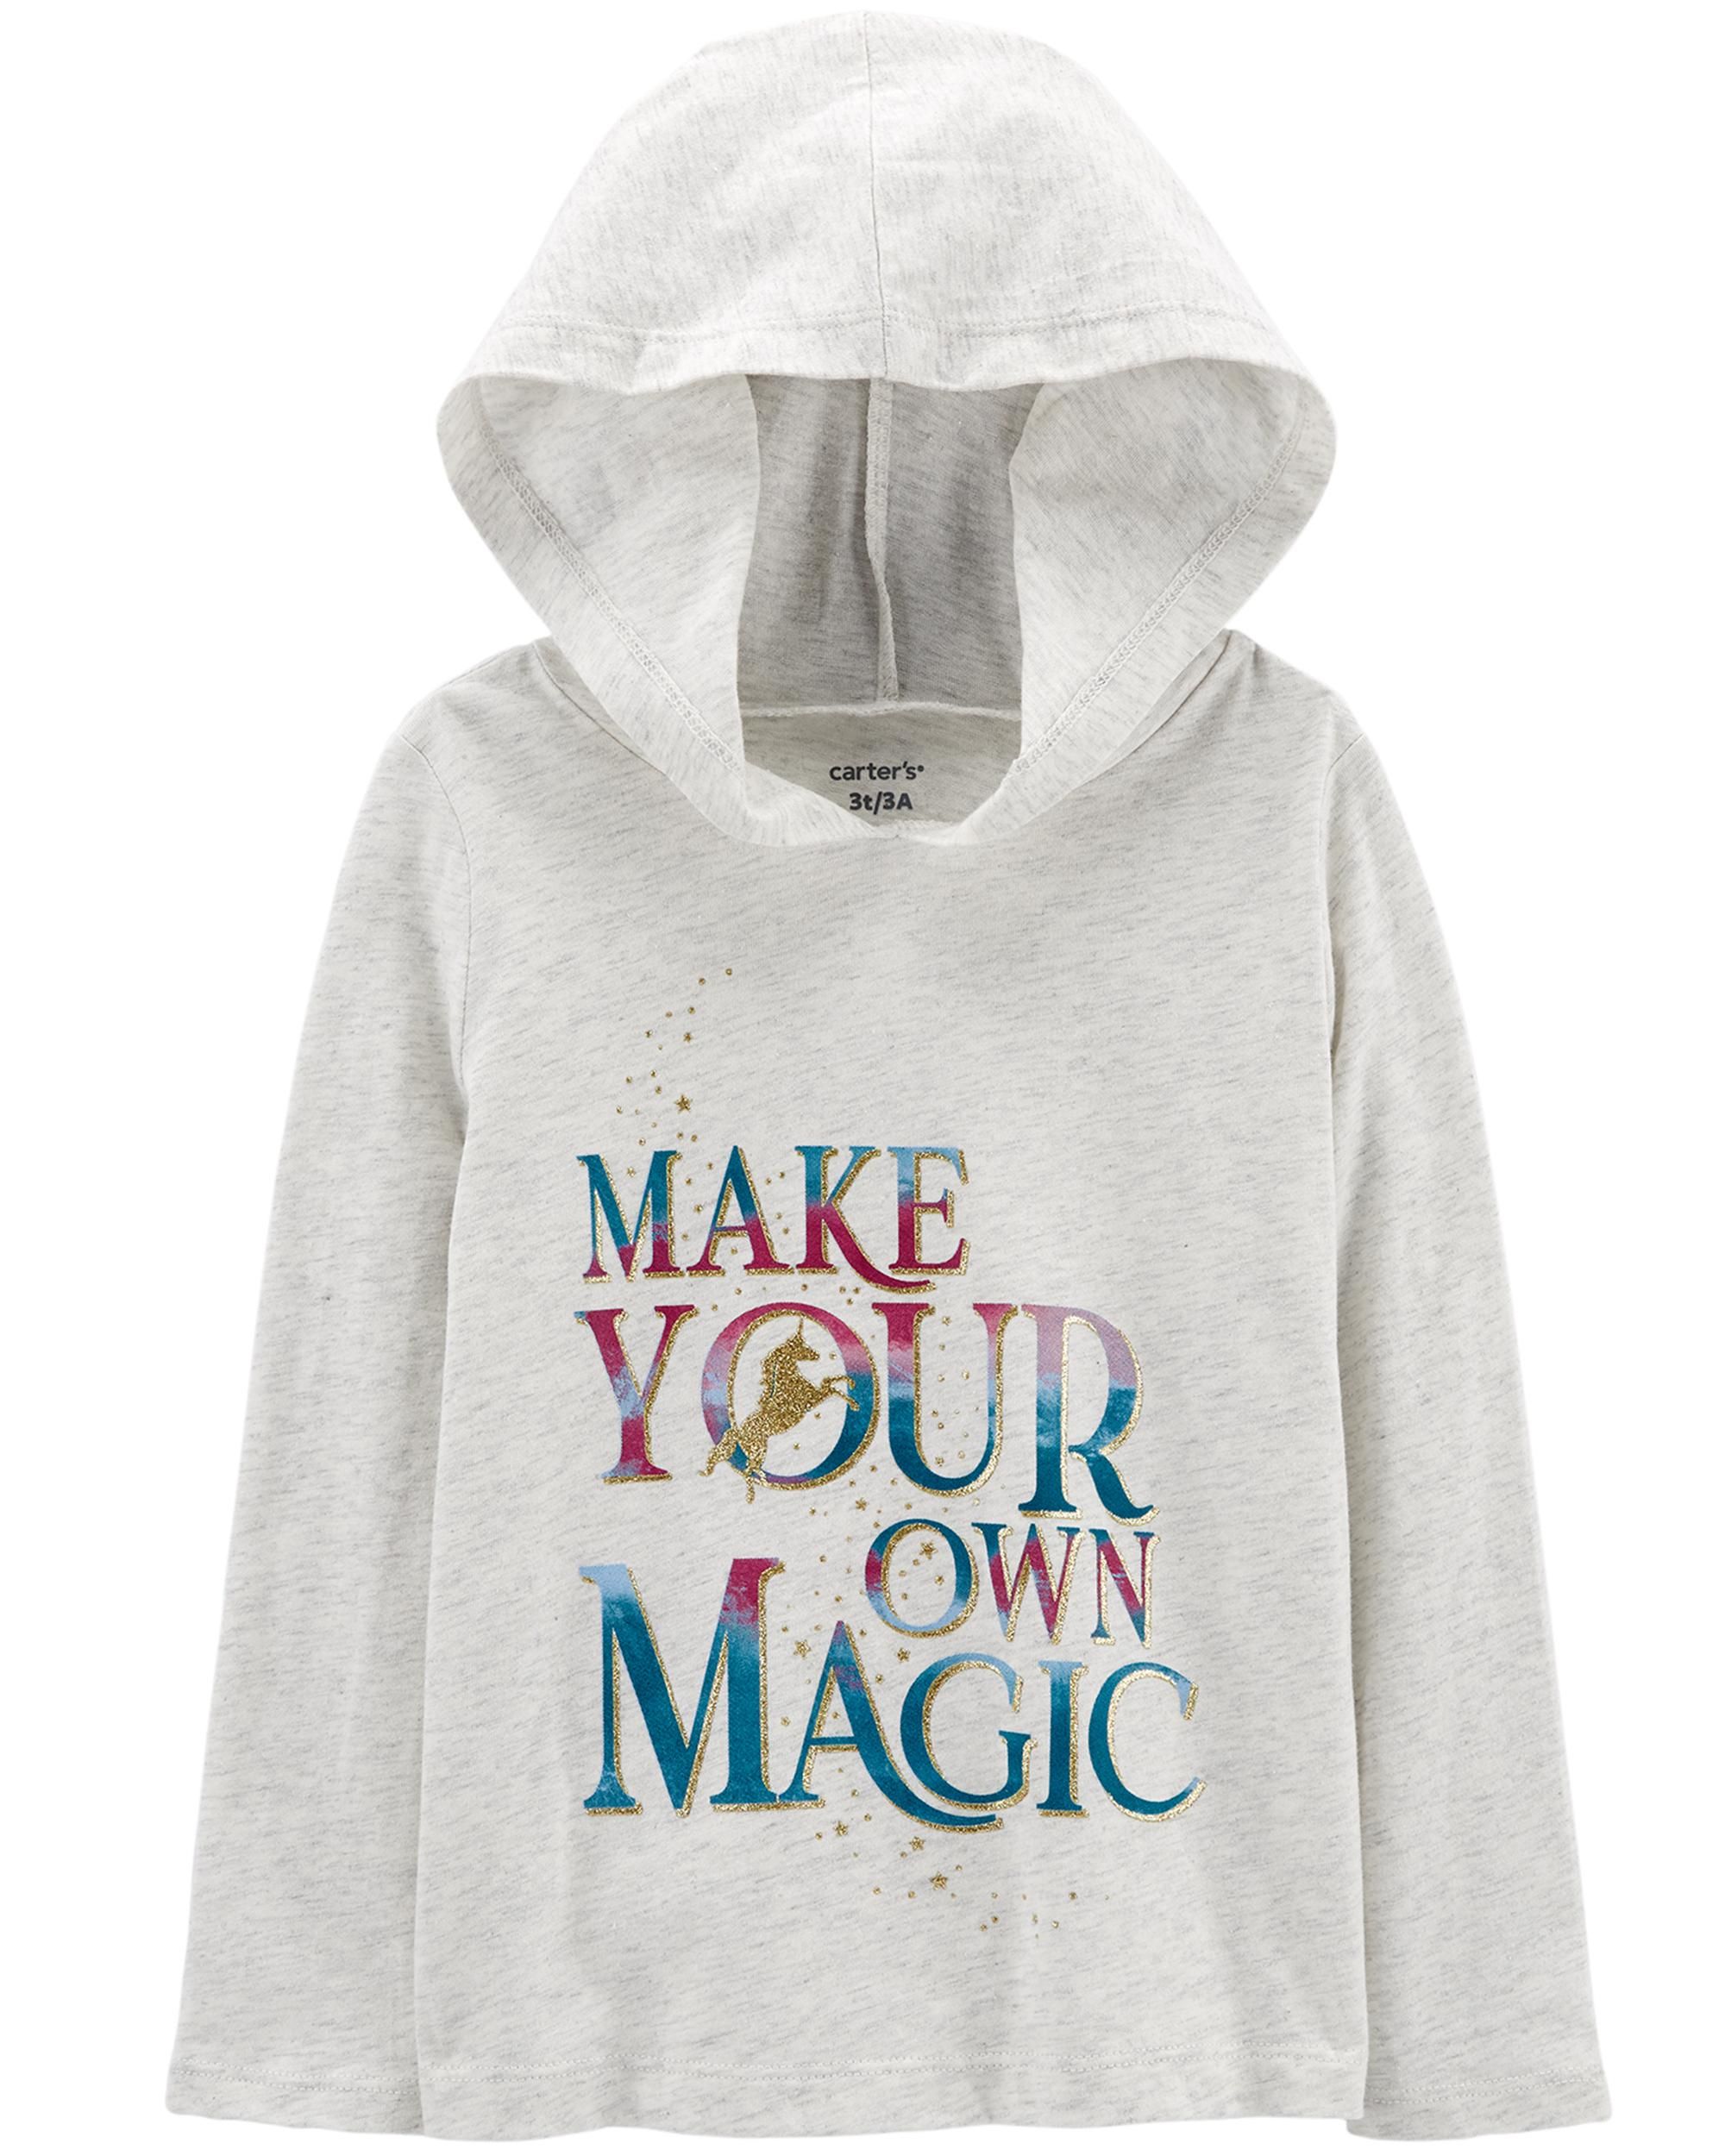 Toddler Make Your Own Magic Jersey Hoodie | Carter's